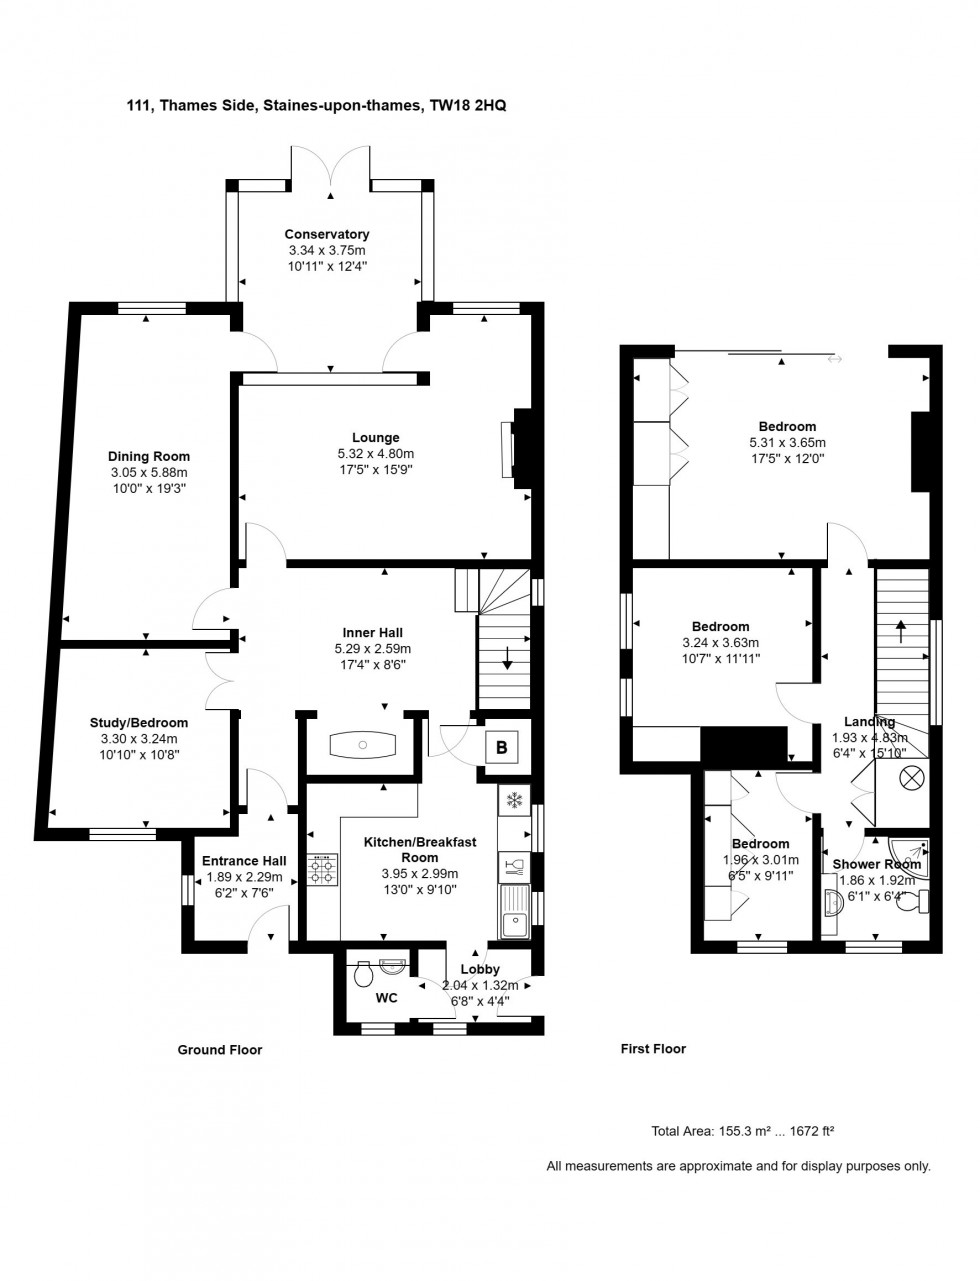 Floorplan for Thames Side, Staines-upon-Thames, Surrey